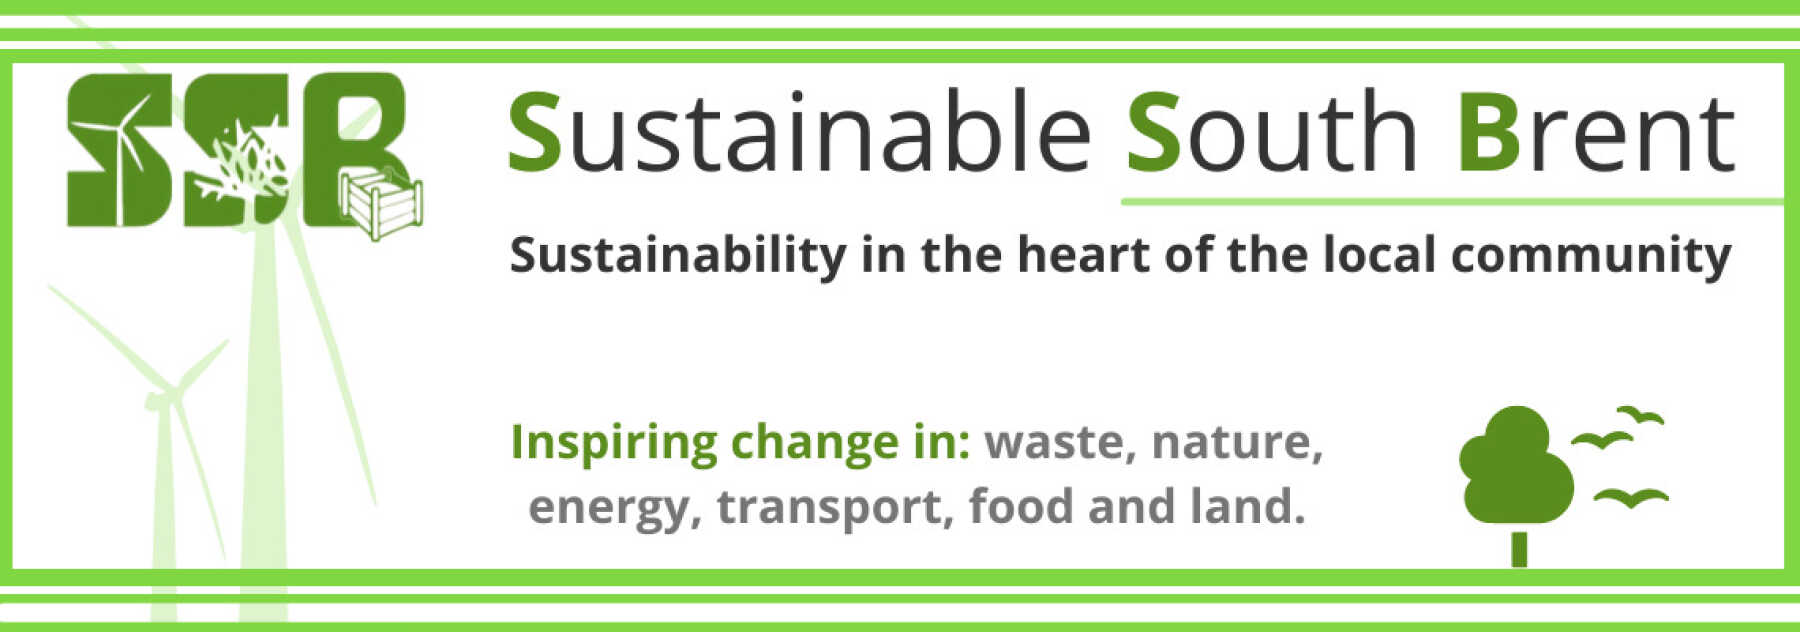 Featured Image for Sustainable South Brent